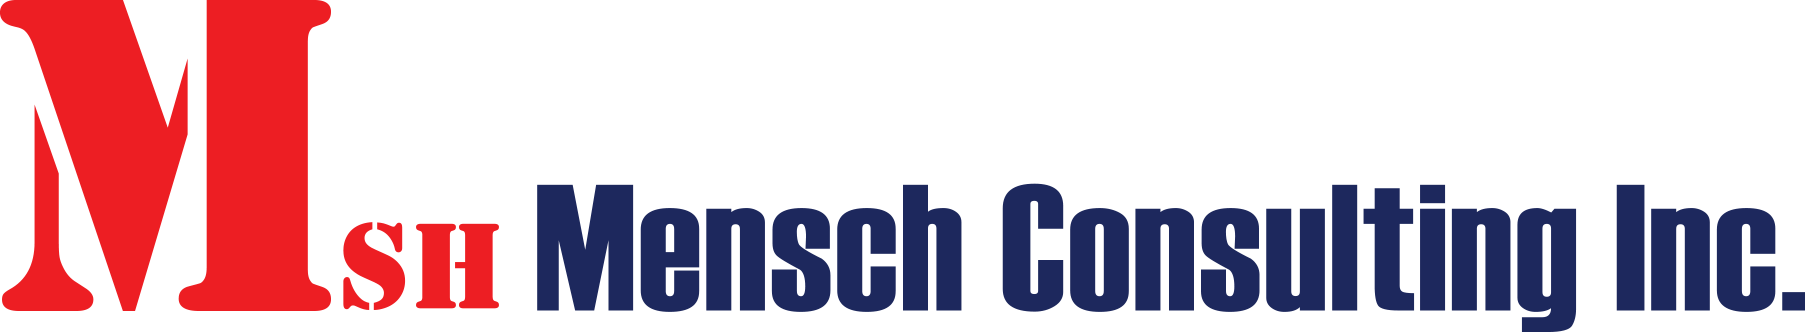 Mensch Consulting Inc.